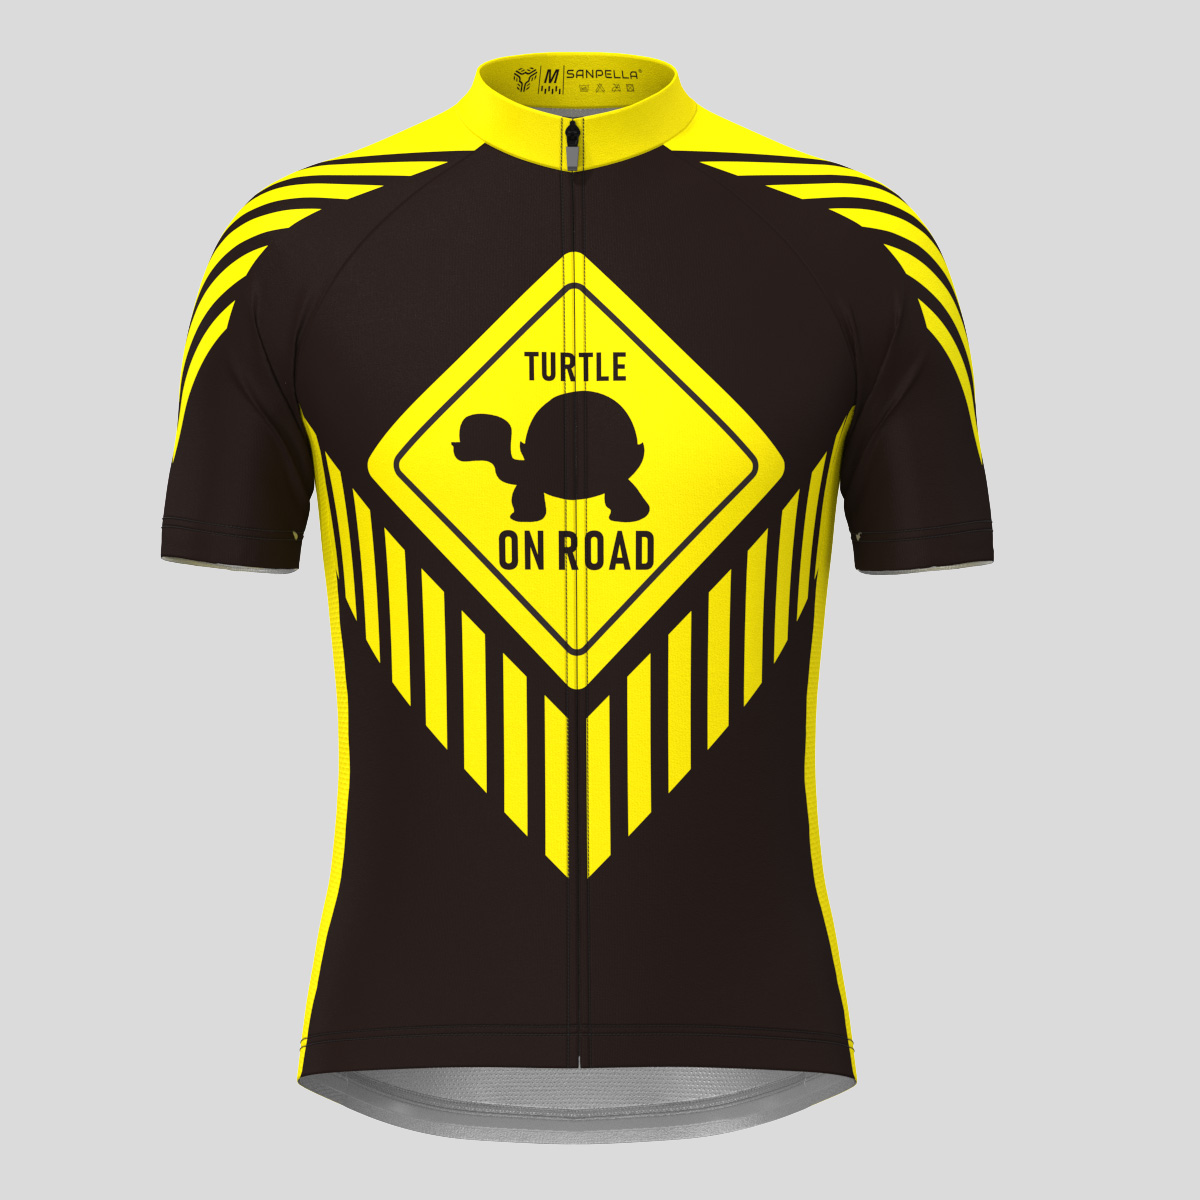 Turtle On Road Men's Cycling Jersey